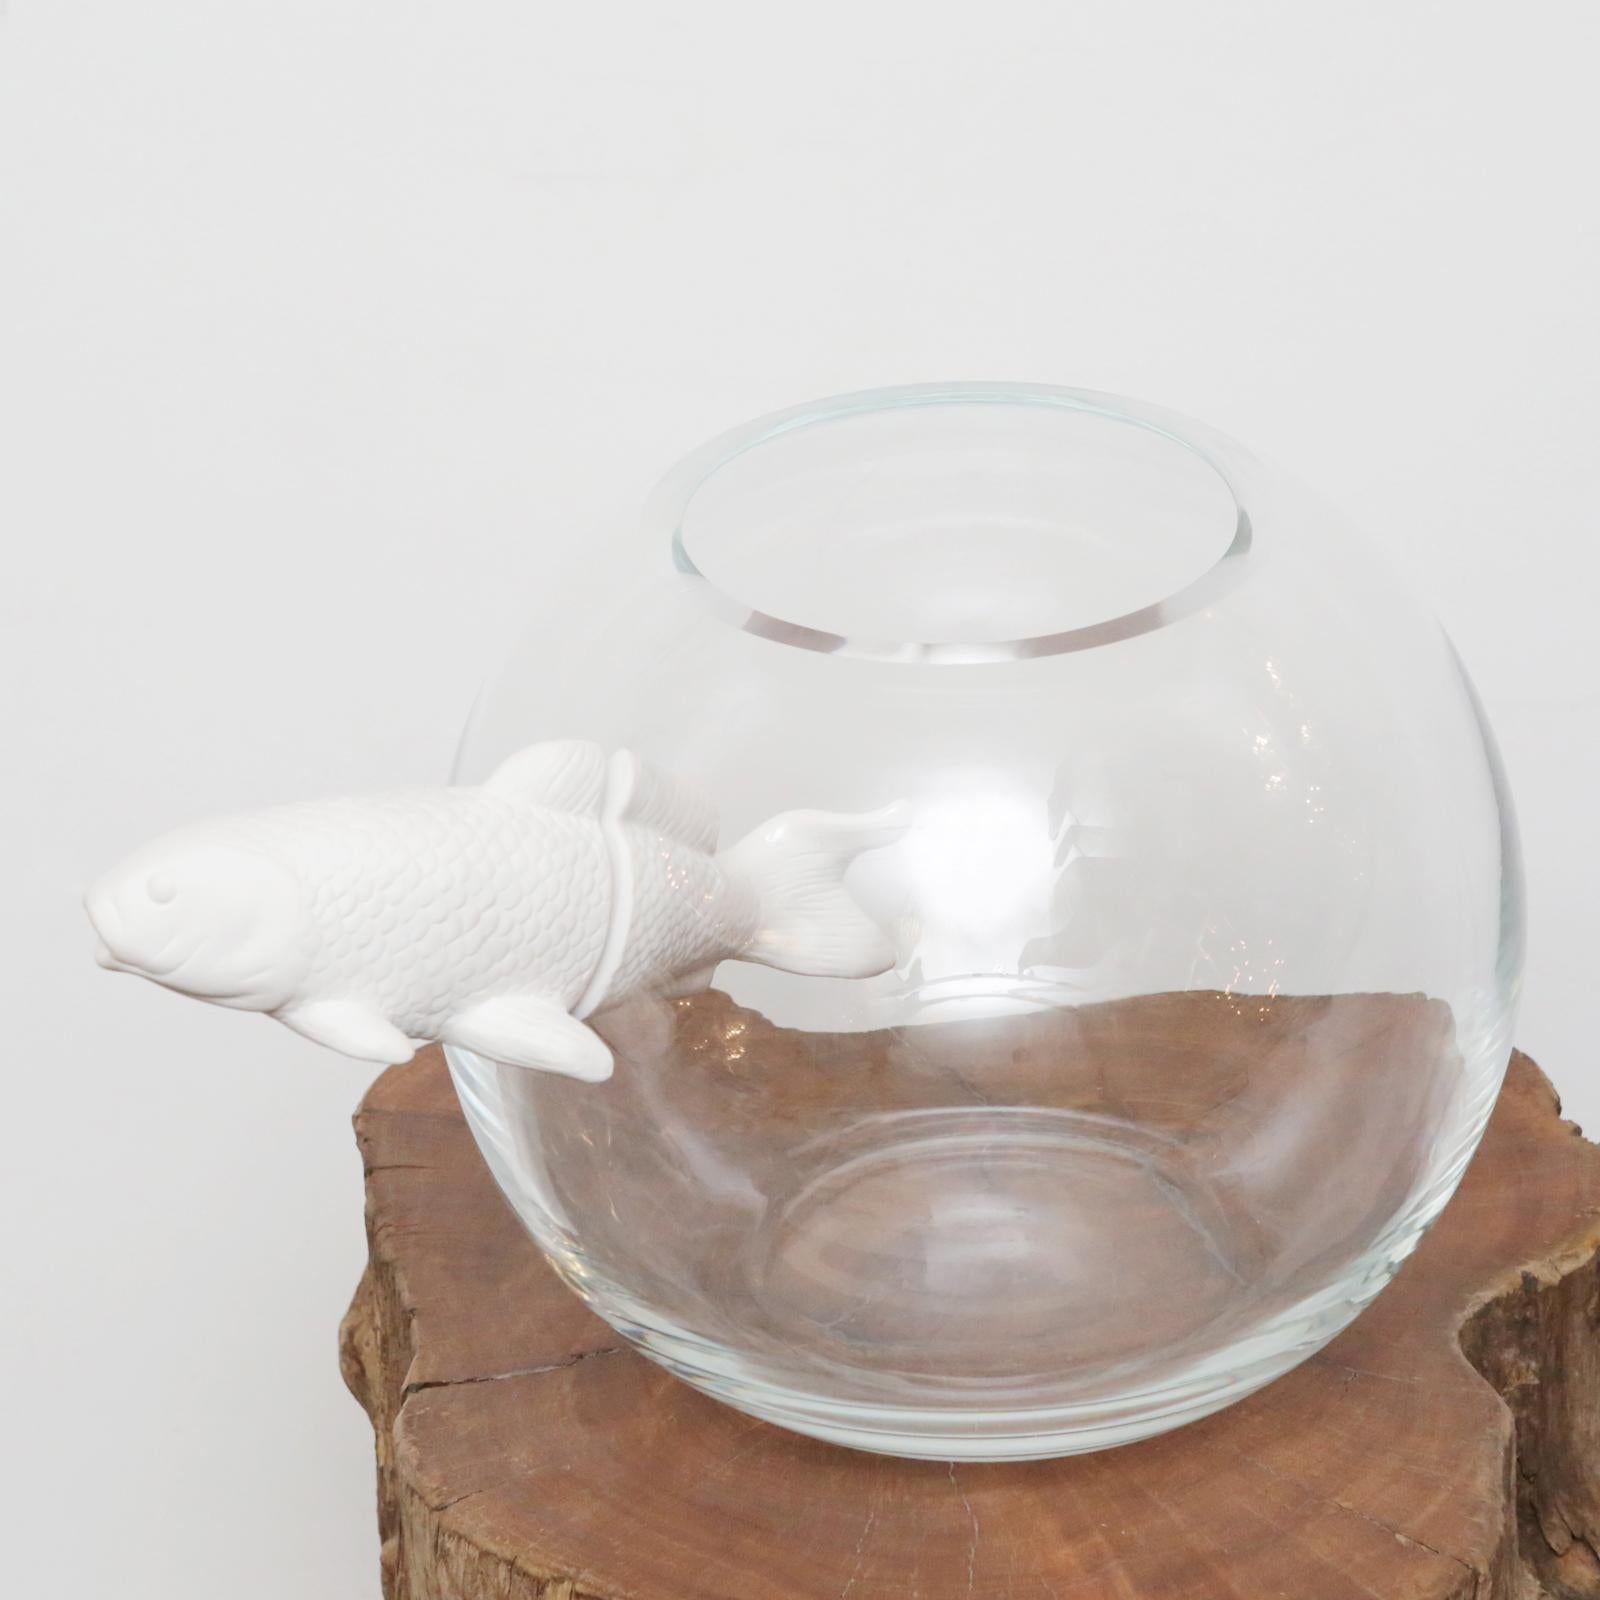 Vase white fish with clear glass and
fish in white ceramic.